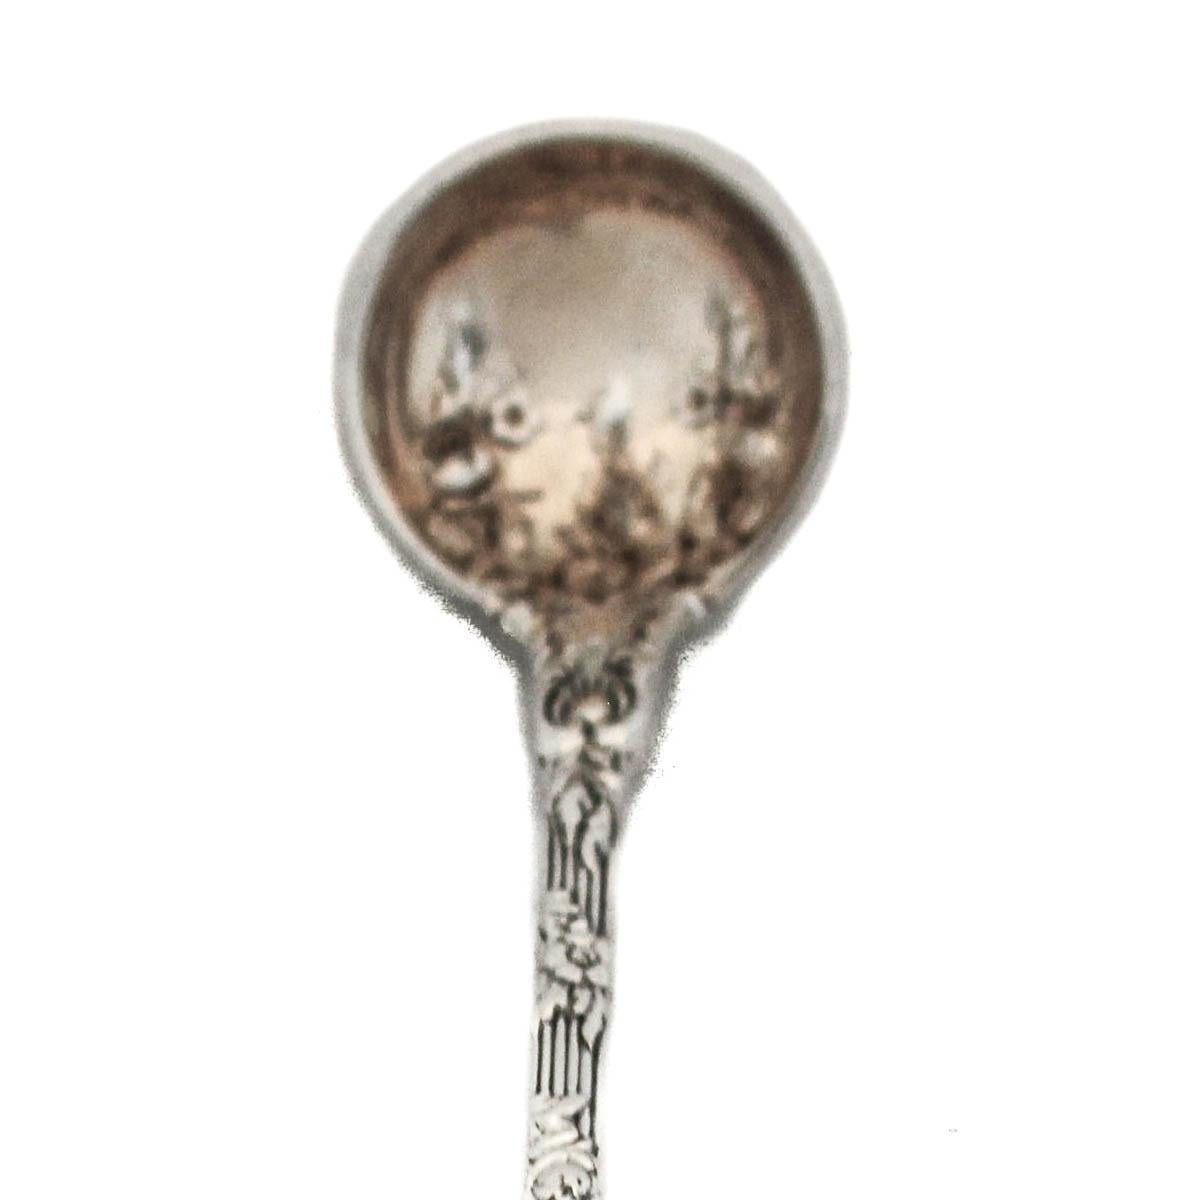 We are offering a sterling silver mustard ladle in the Dauphin pattern by William B. Durgin (Gorham Silversmiths). Dauphin is one of the most sought-after patterns of all times. It’s beauty and design is considered one of the finest in all sterling